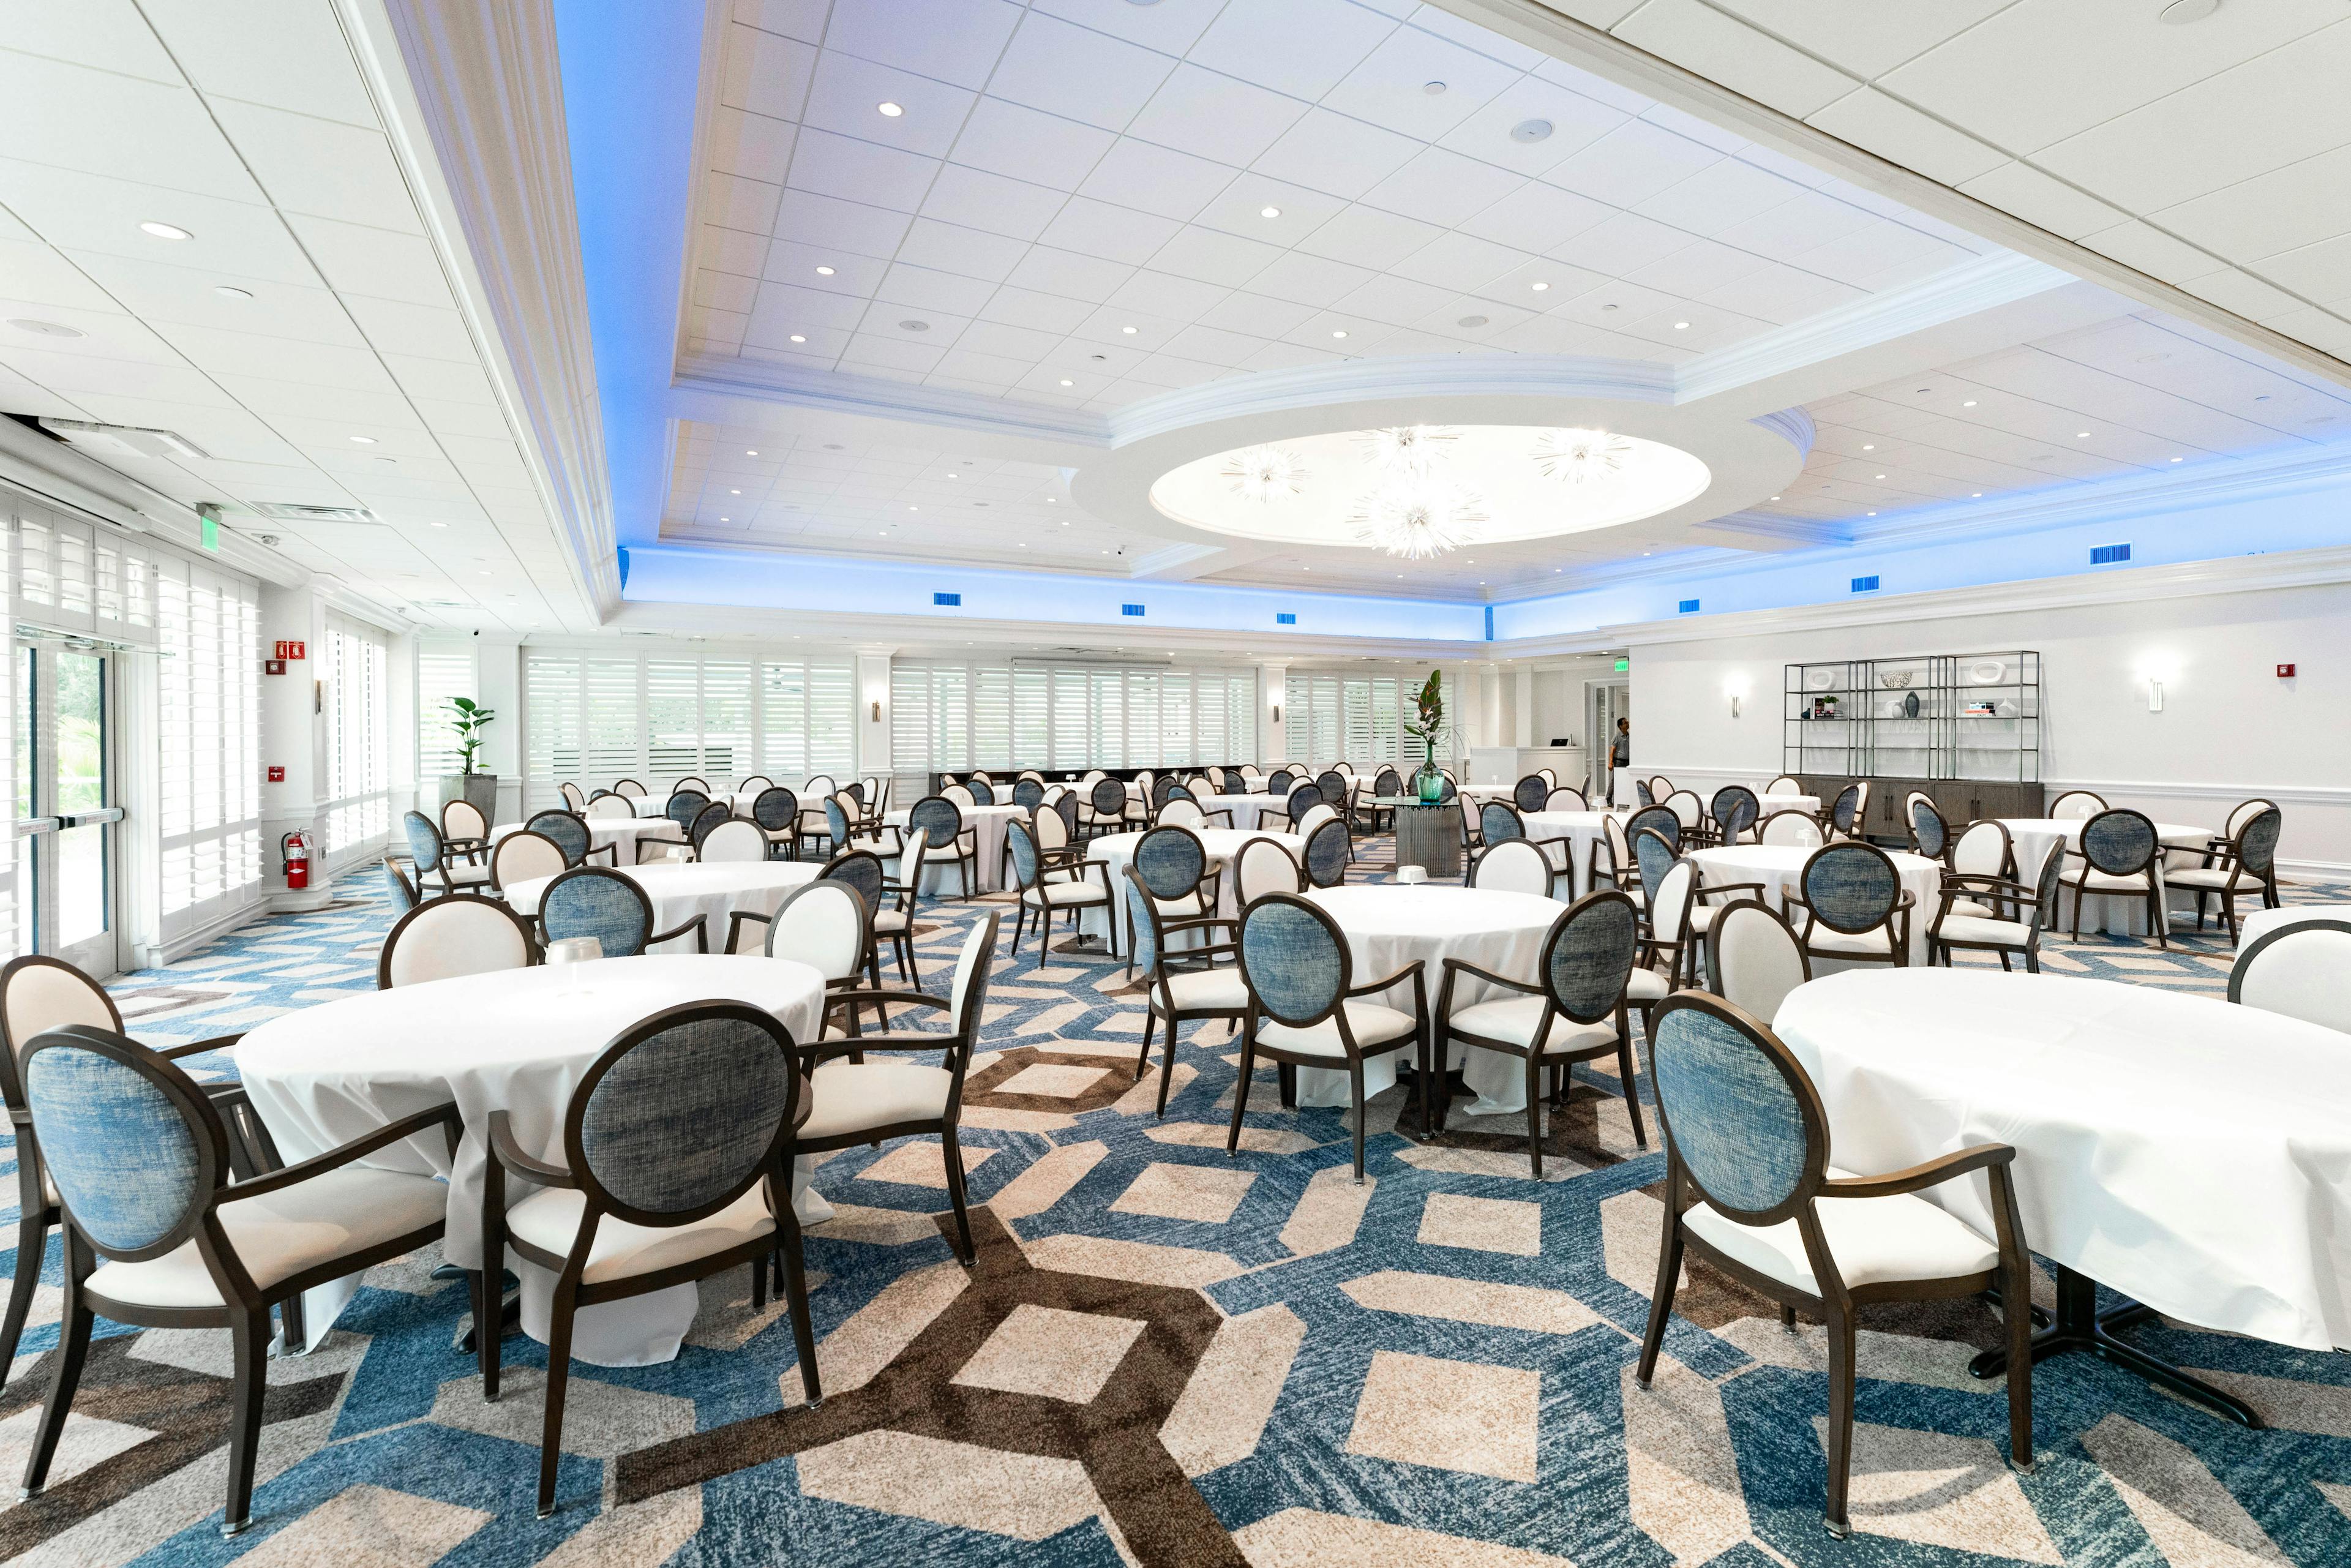 Another view of the newly renovated main dining room